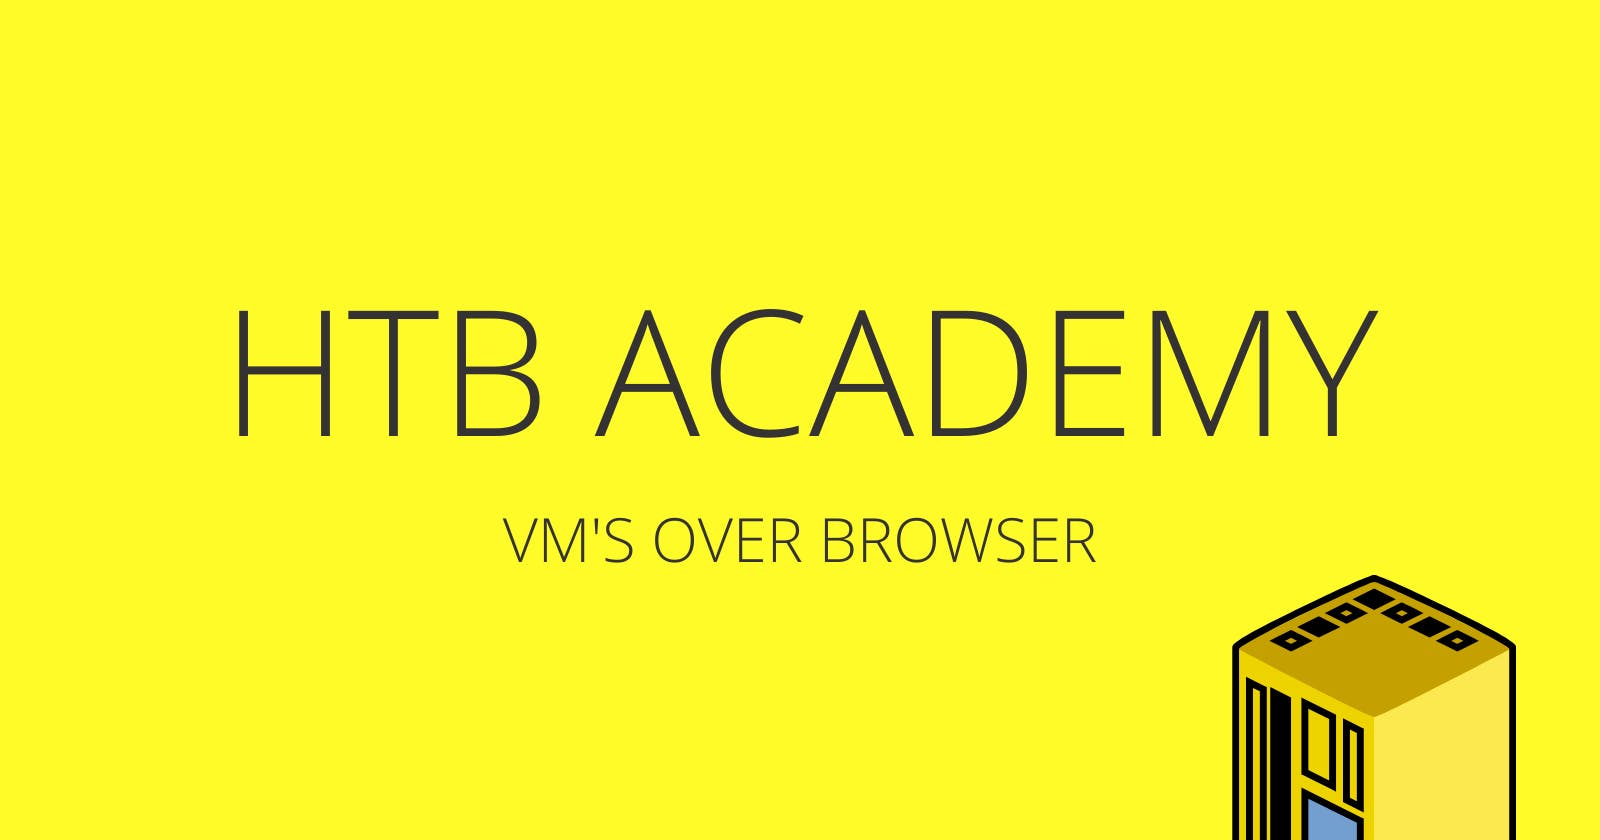 What's HTB  Academy - Free Virtual Machines over Browser